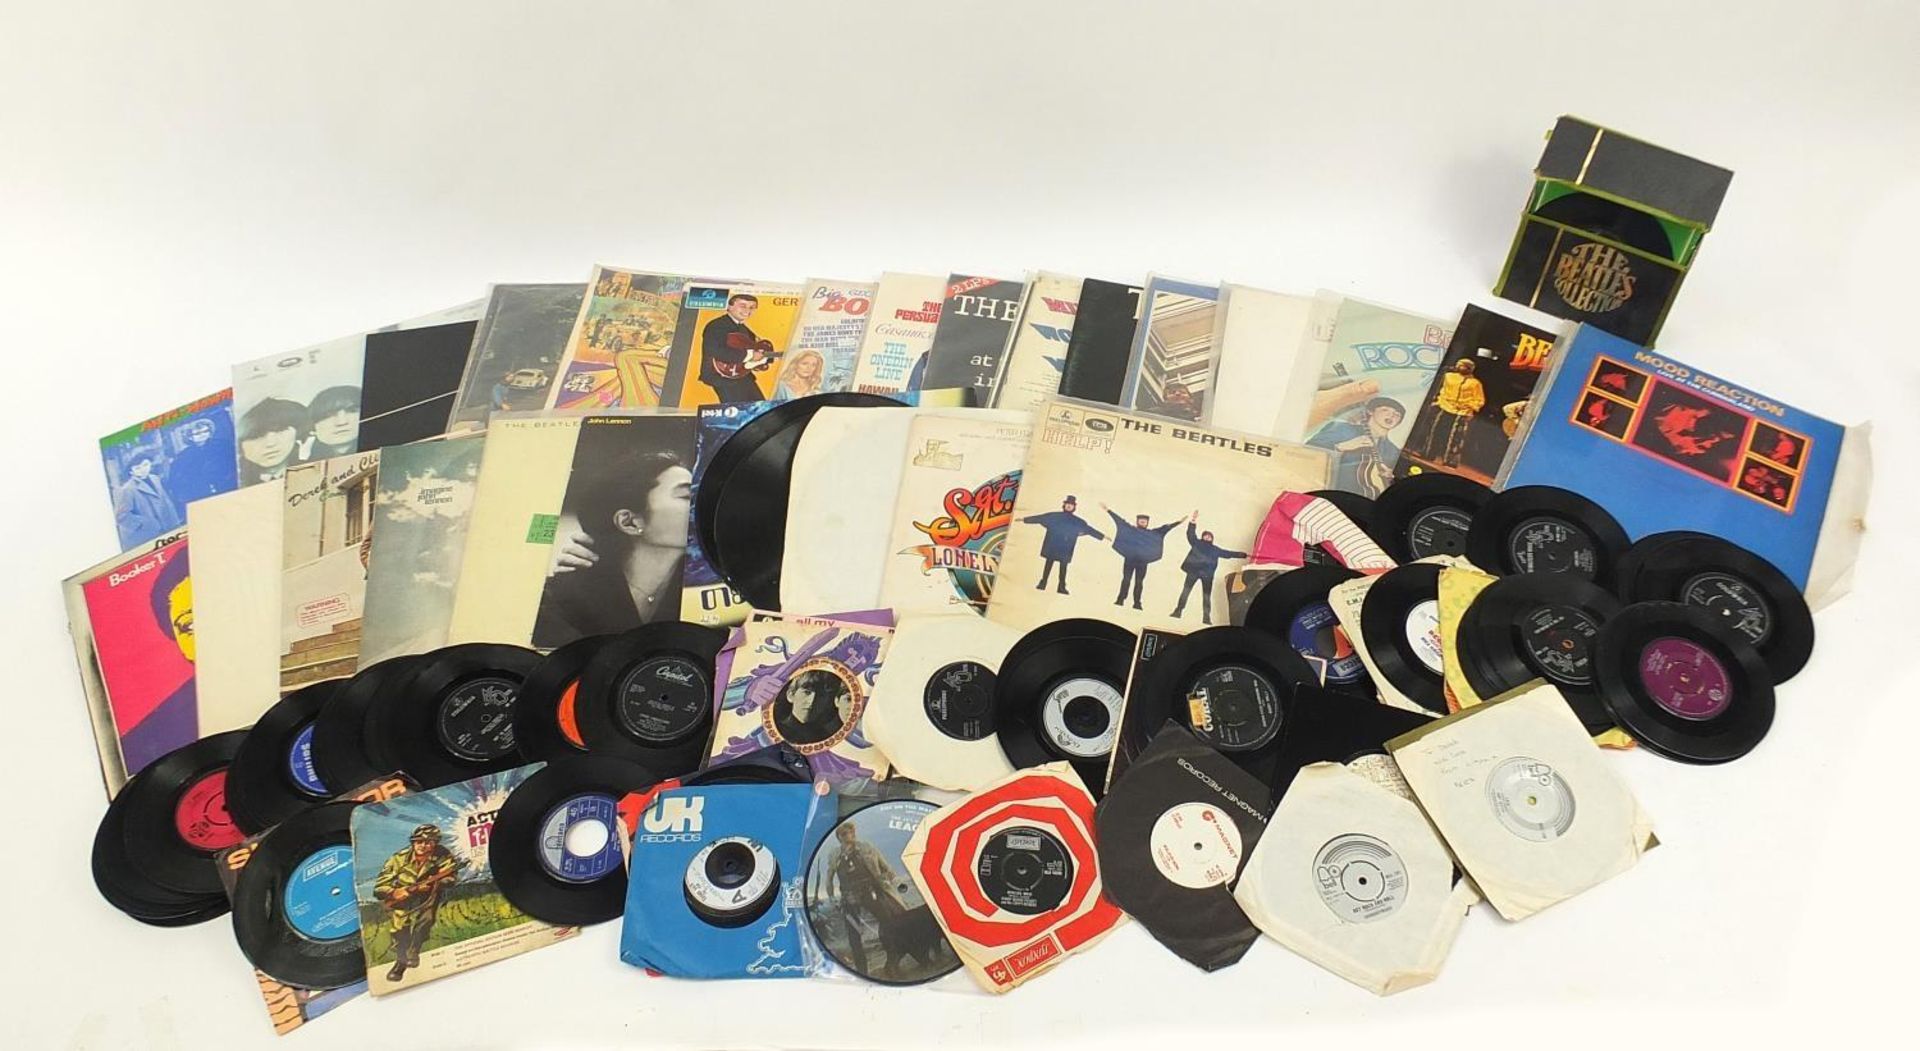 Vinyl LP's and 45rpm records including Led Zeppelin, The Beatles Collection and Abbey road